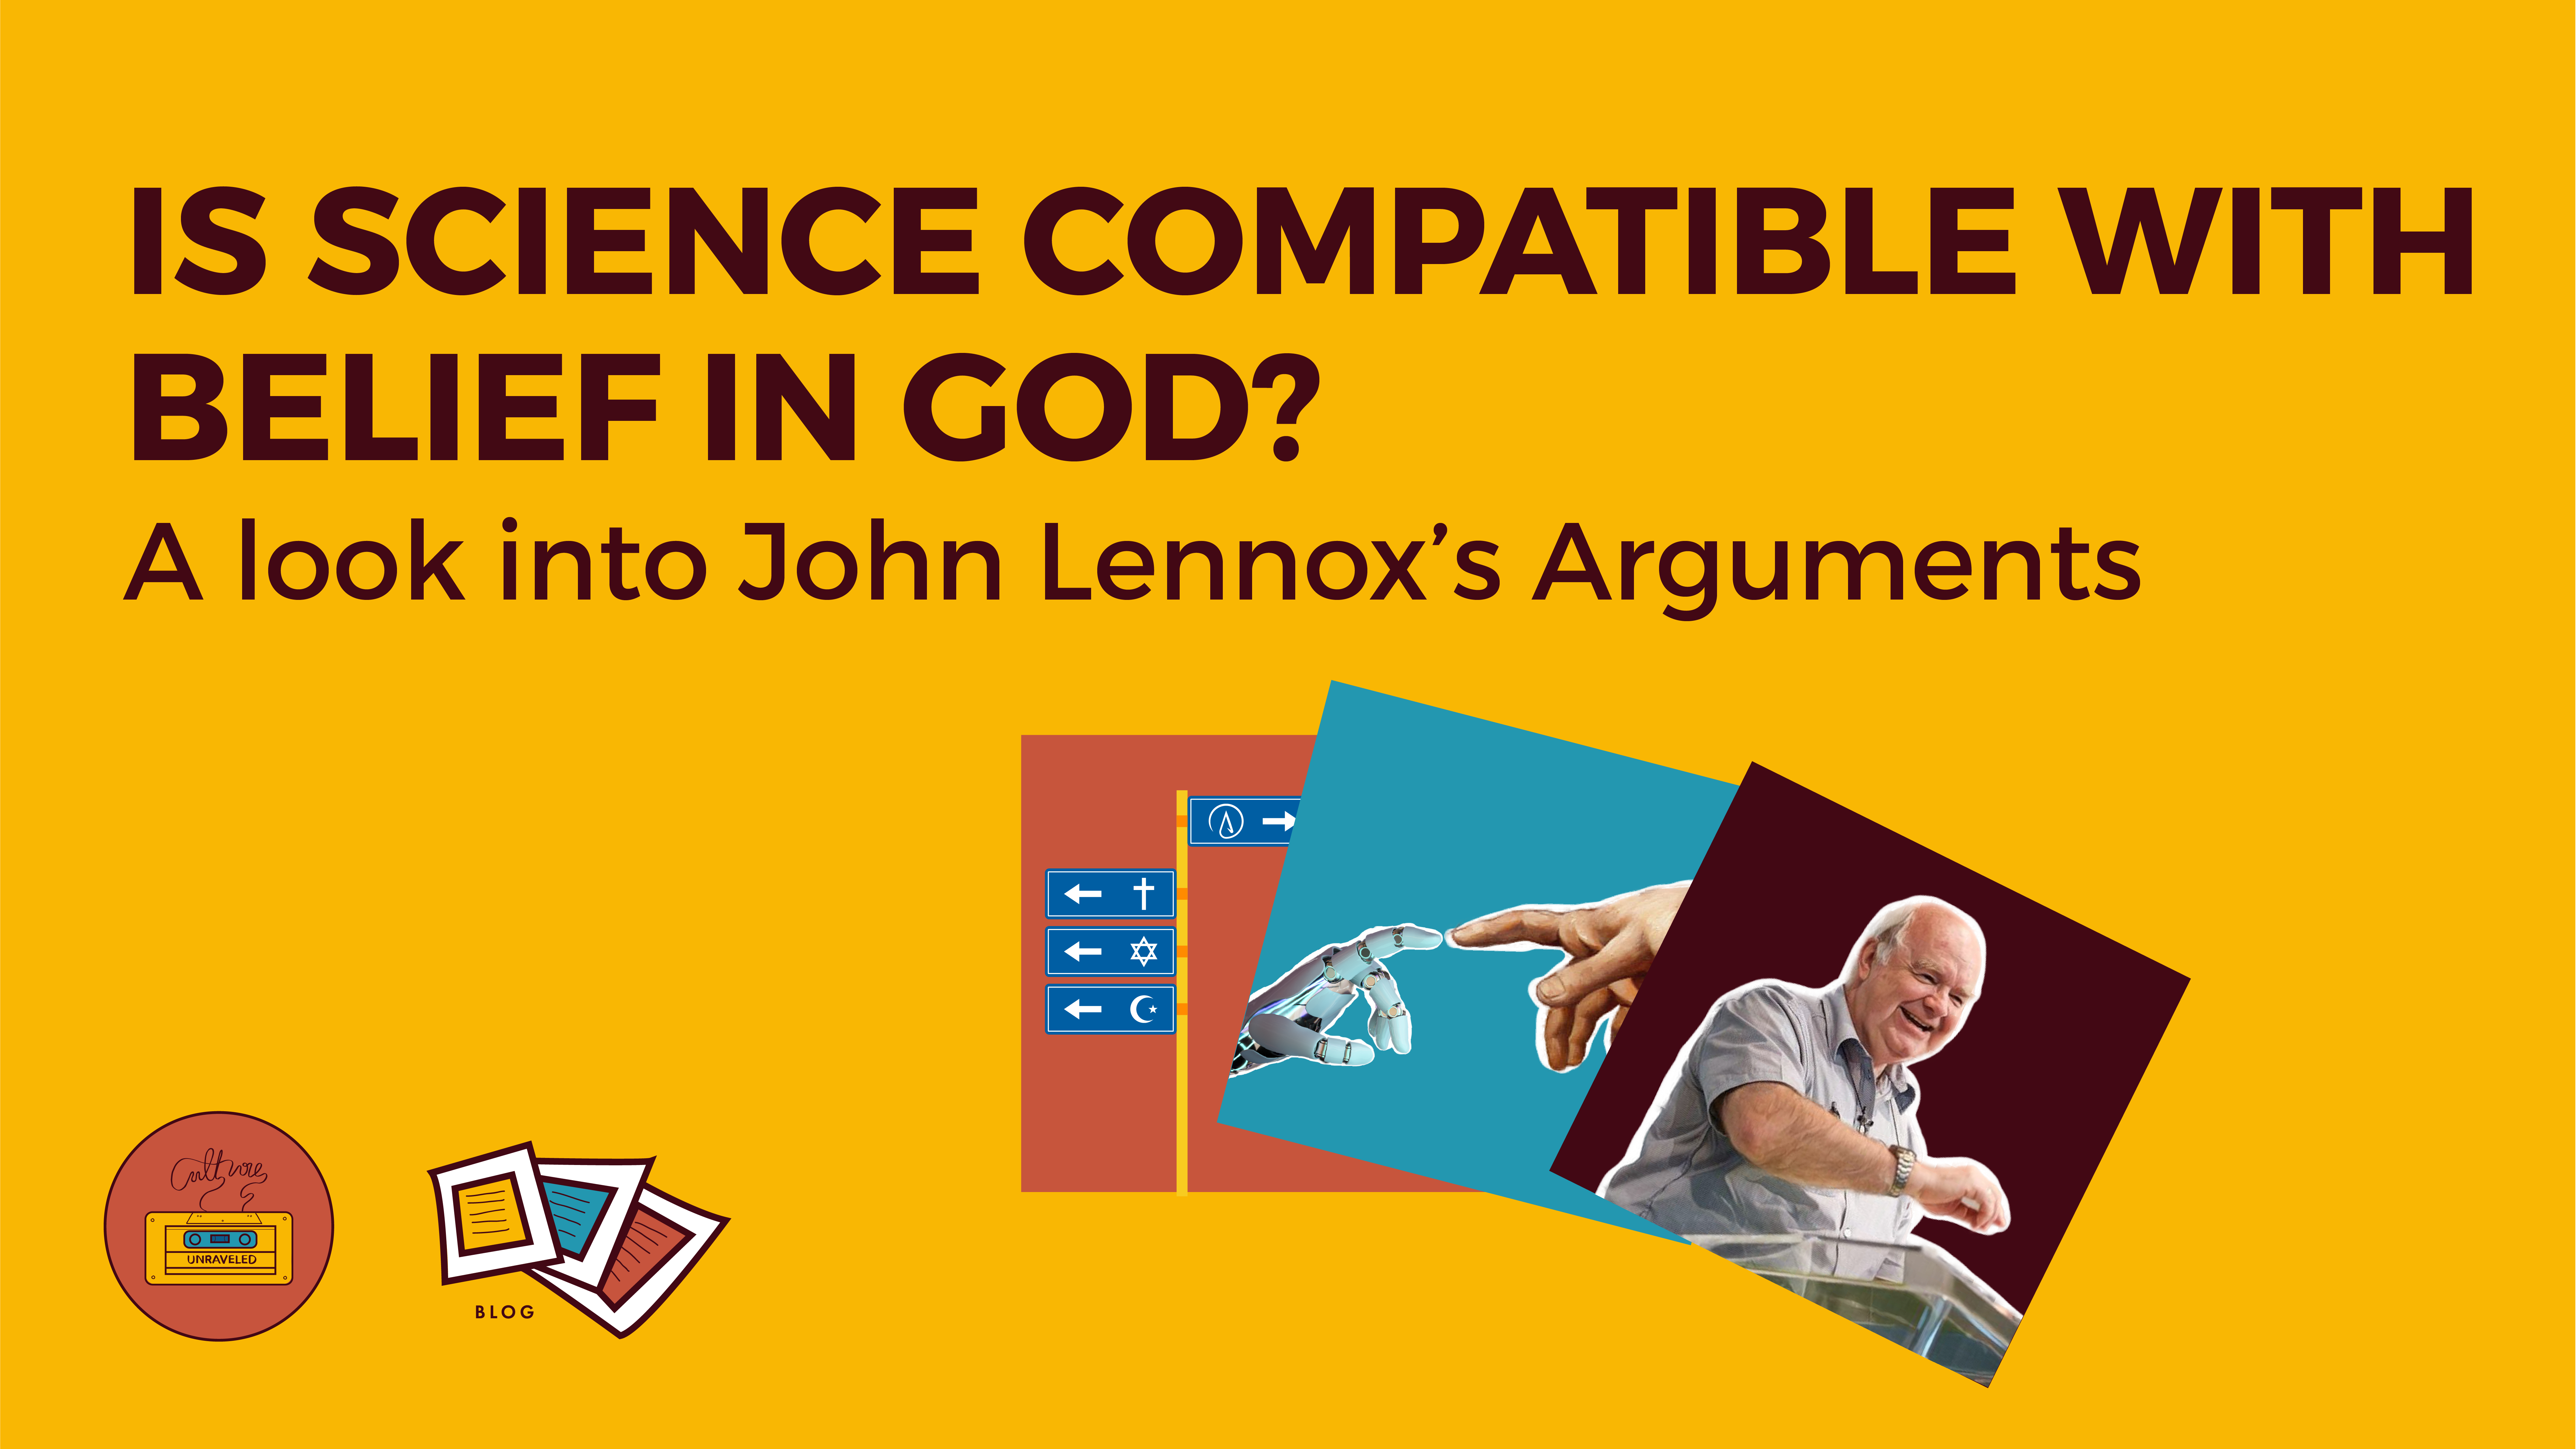 Is Science compatible with belief in God? A Look into John Lennox’s Arguments